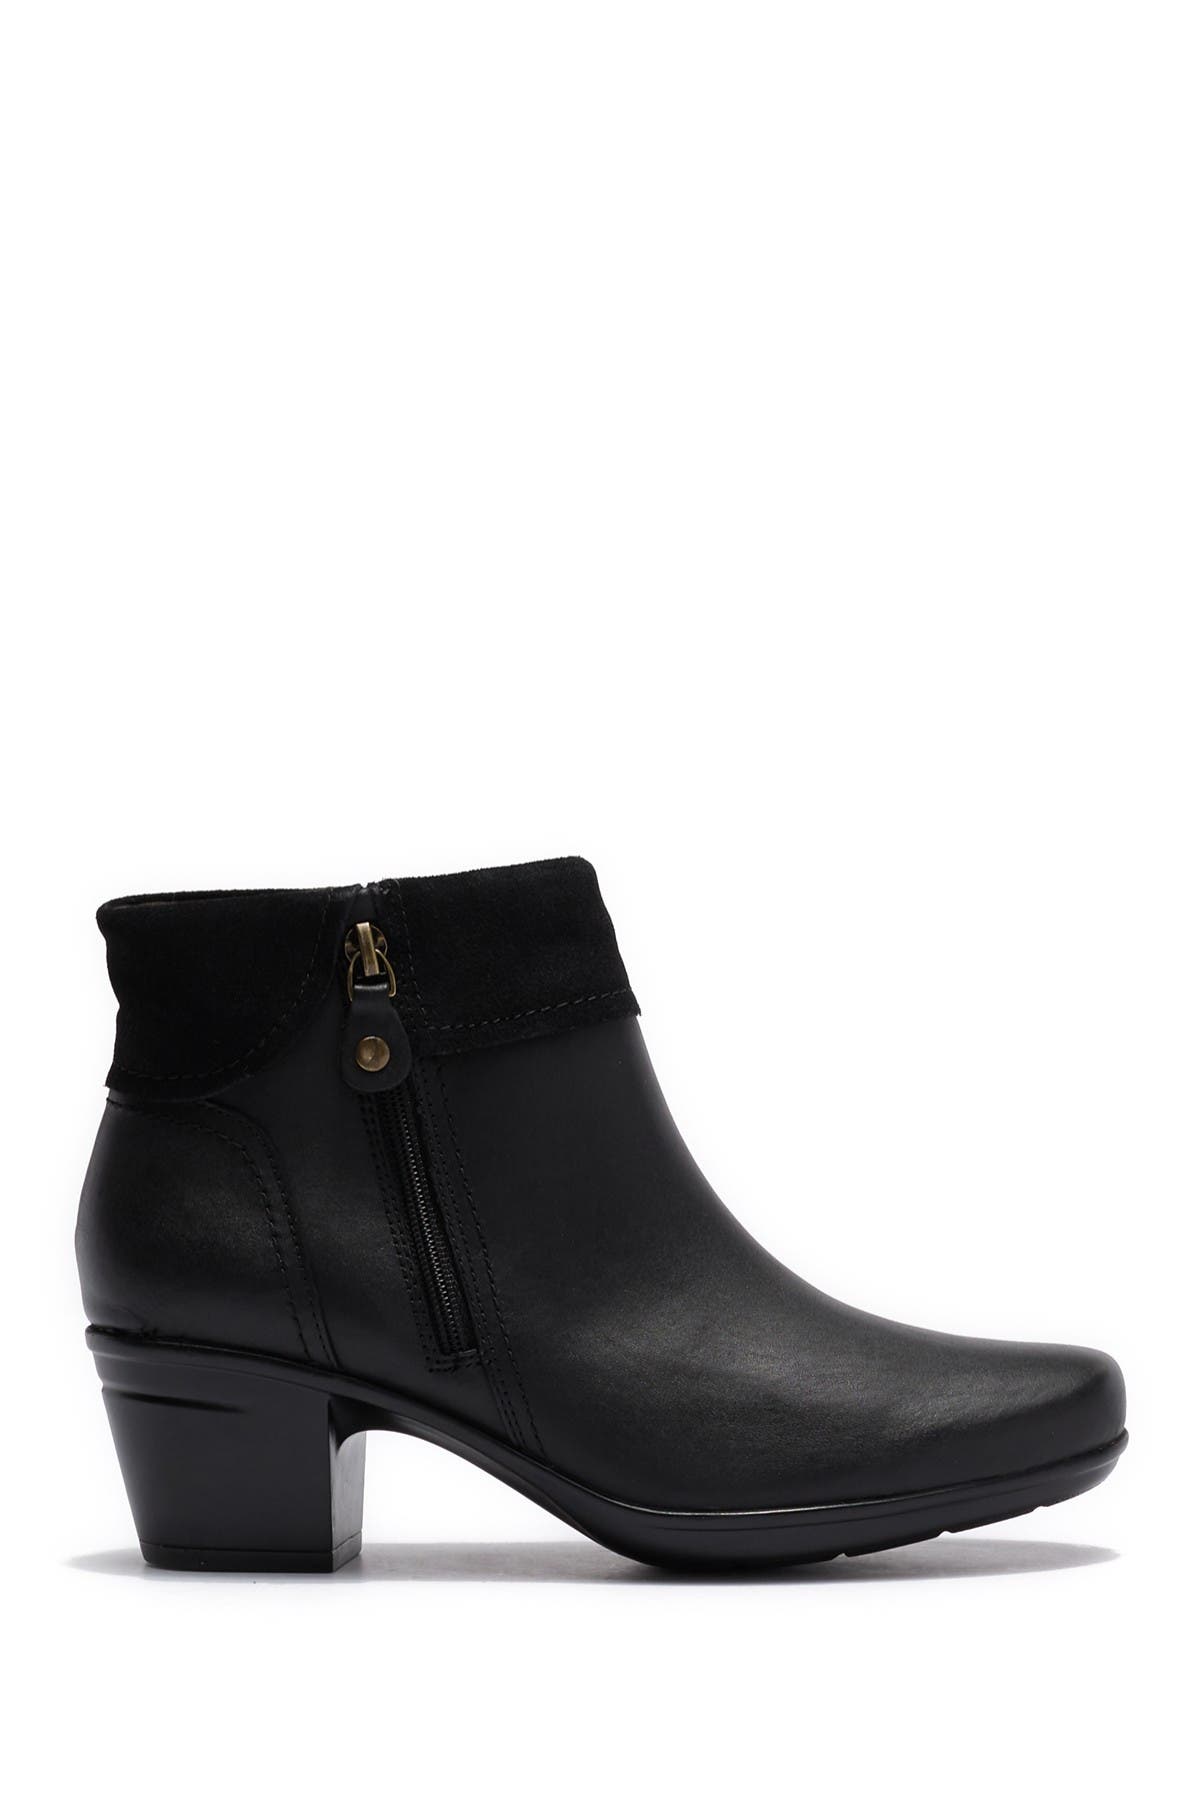 emslie twist leather ankle boot